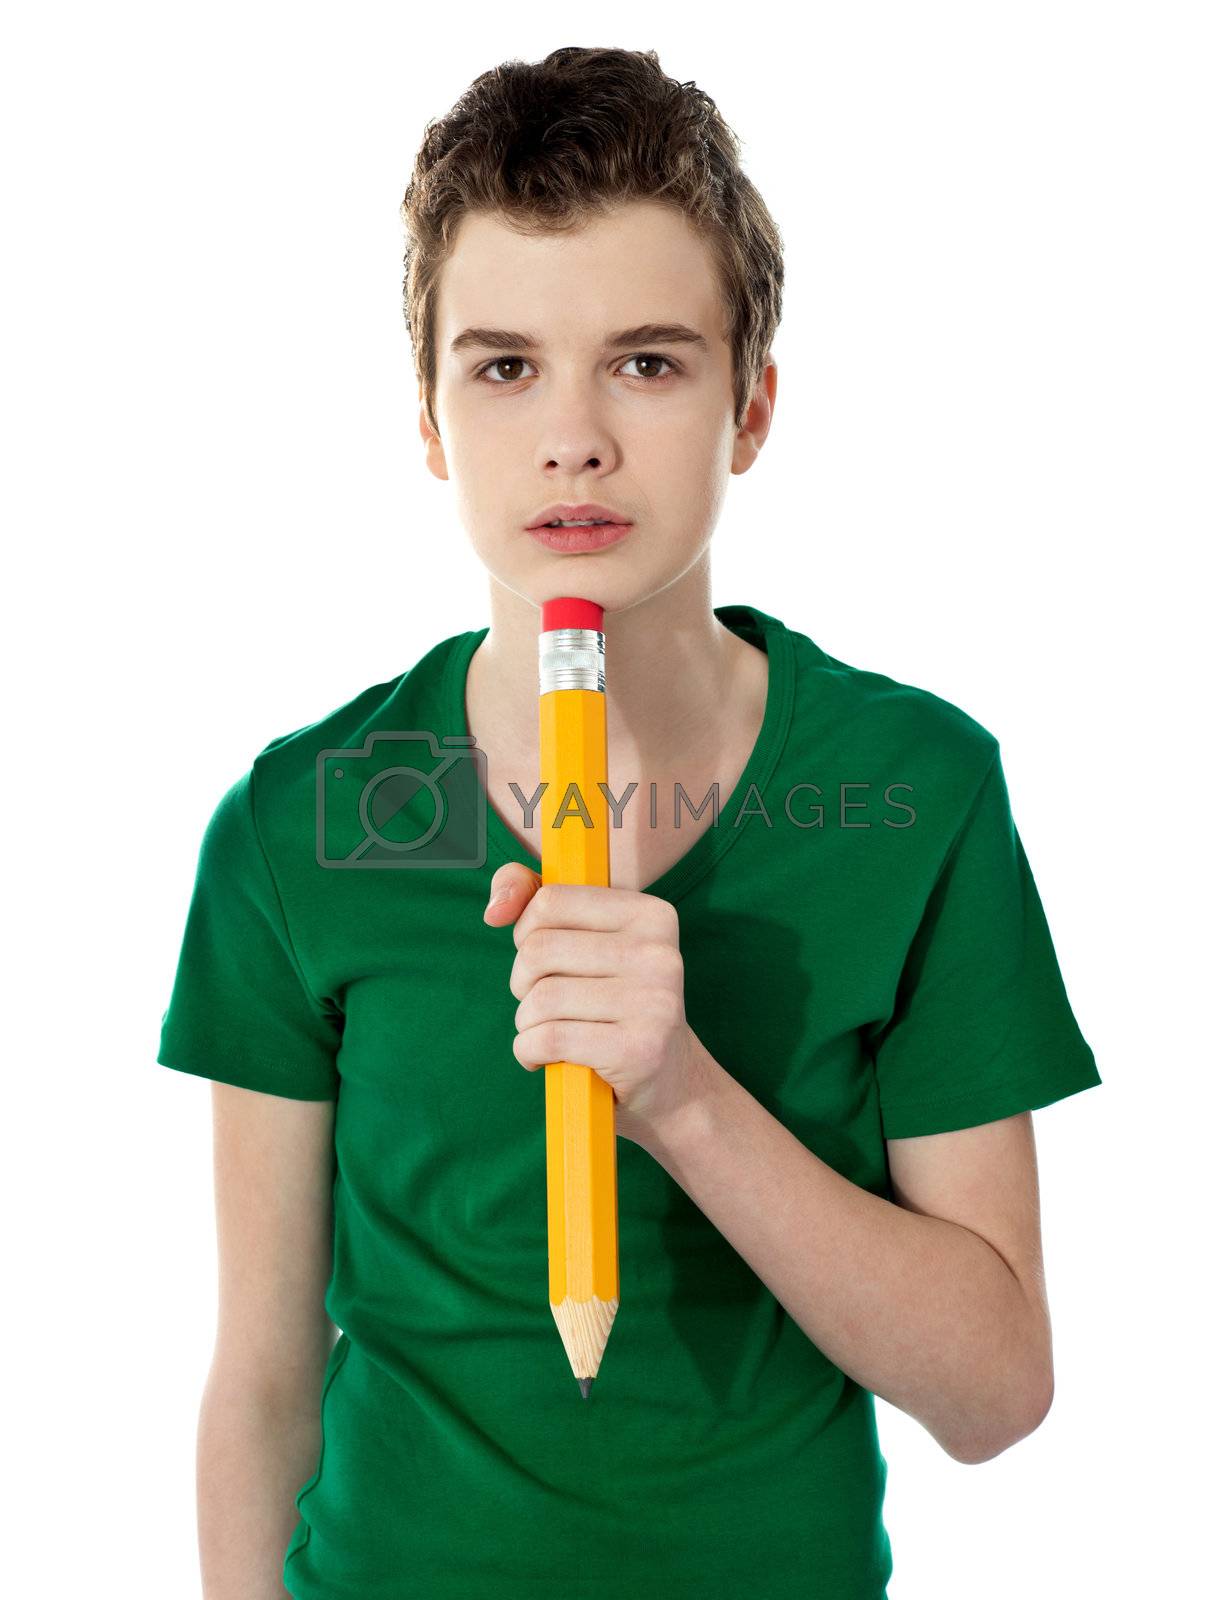 Royalty free image of School boy thinking while holding pencil by stockyimages